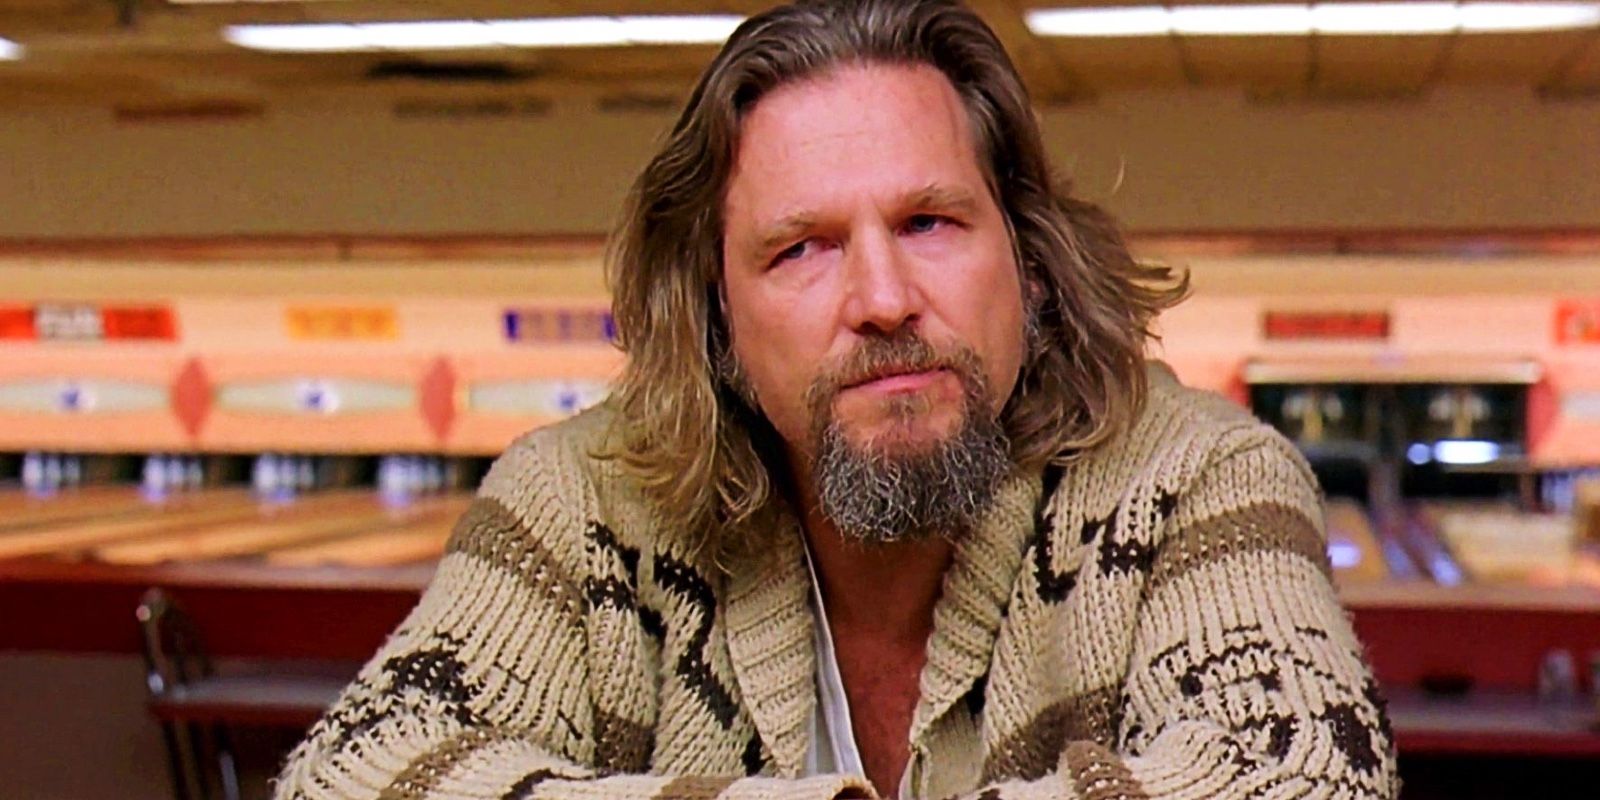 What happened to the money in Big Lebowski?